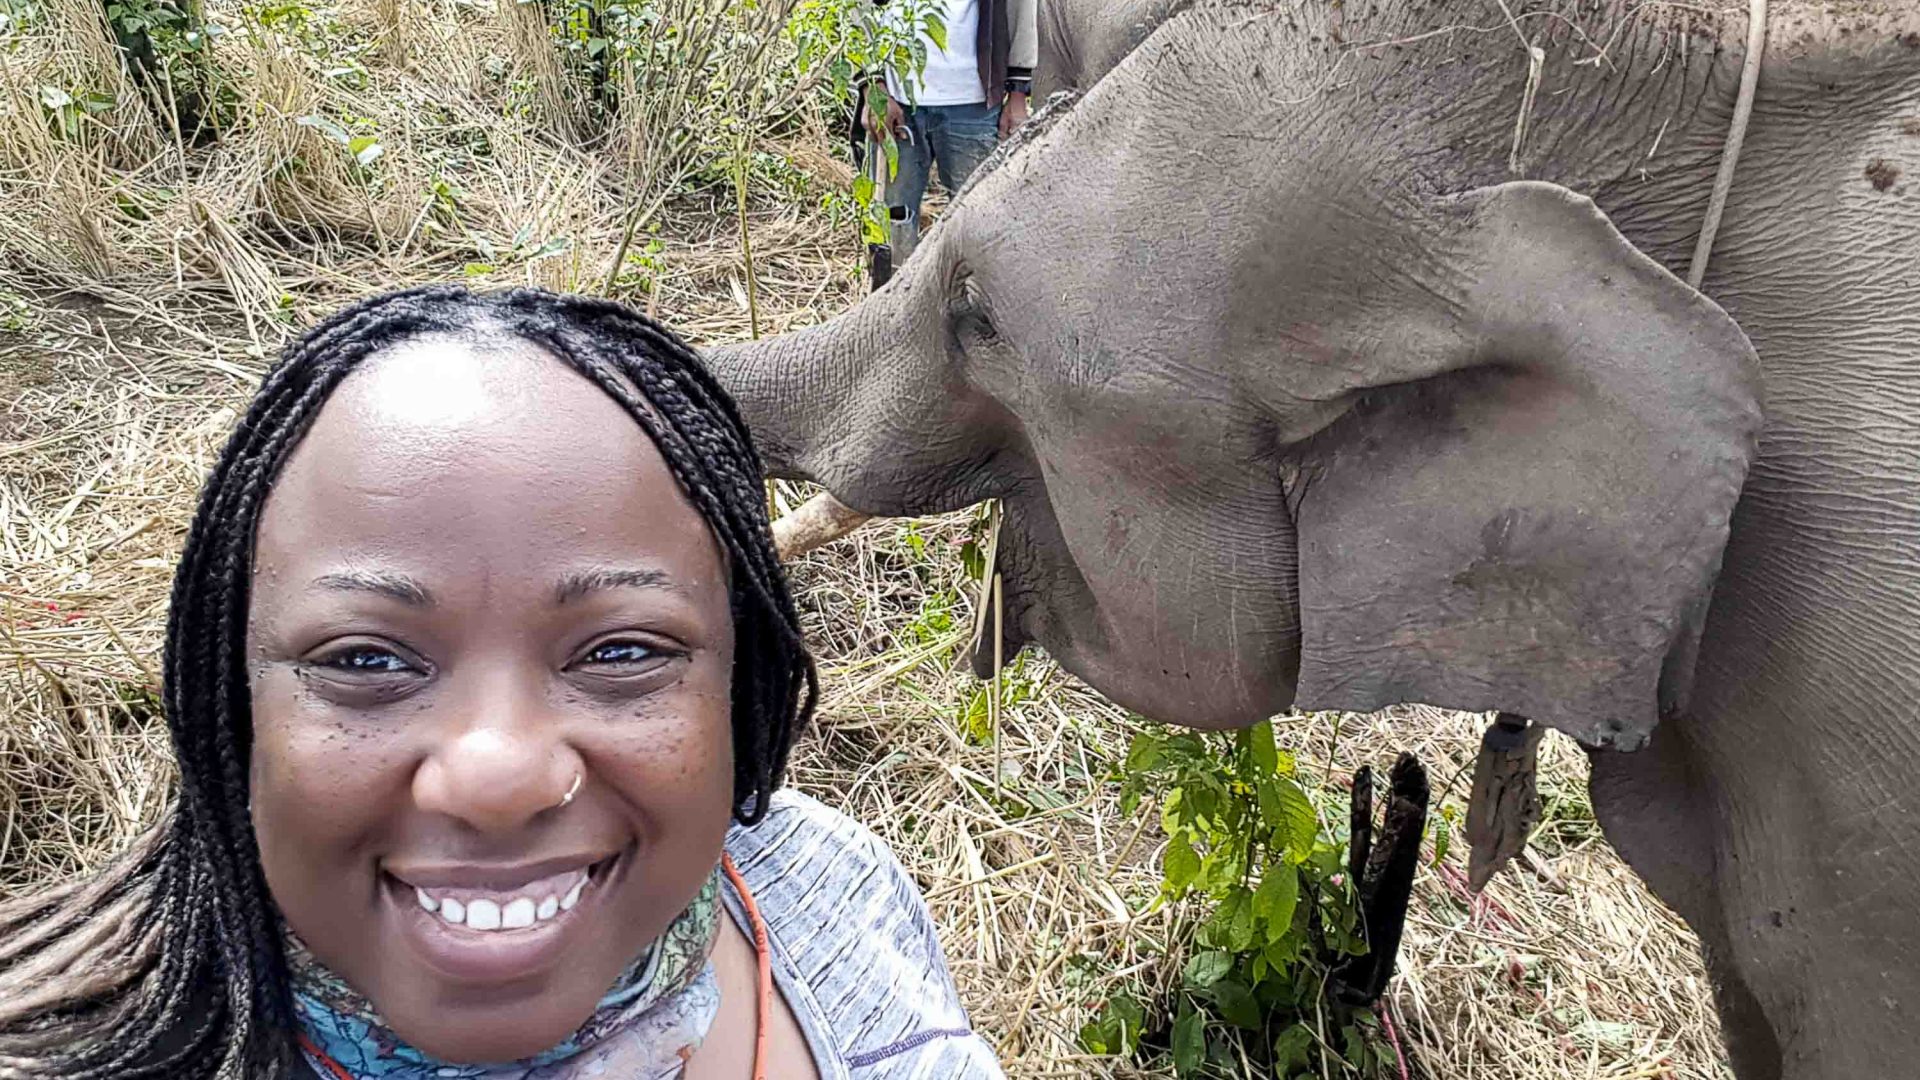 A woman does a selfie with an elephant in the background.